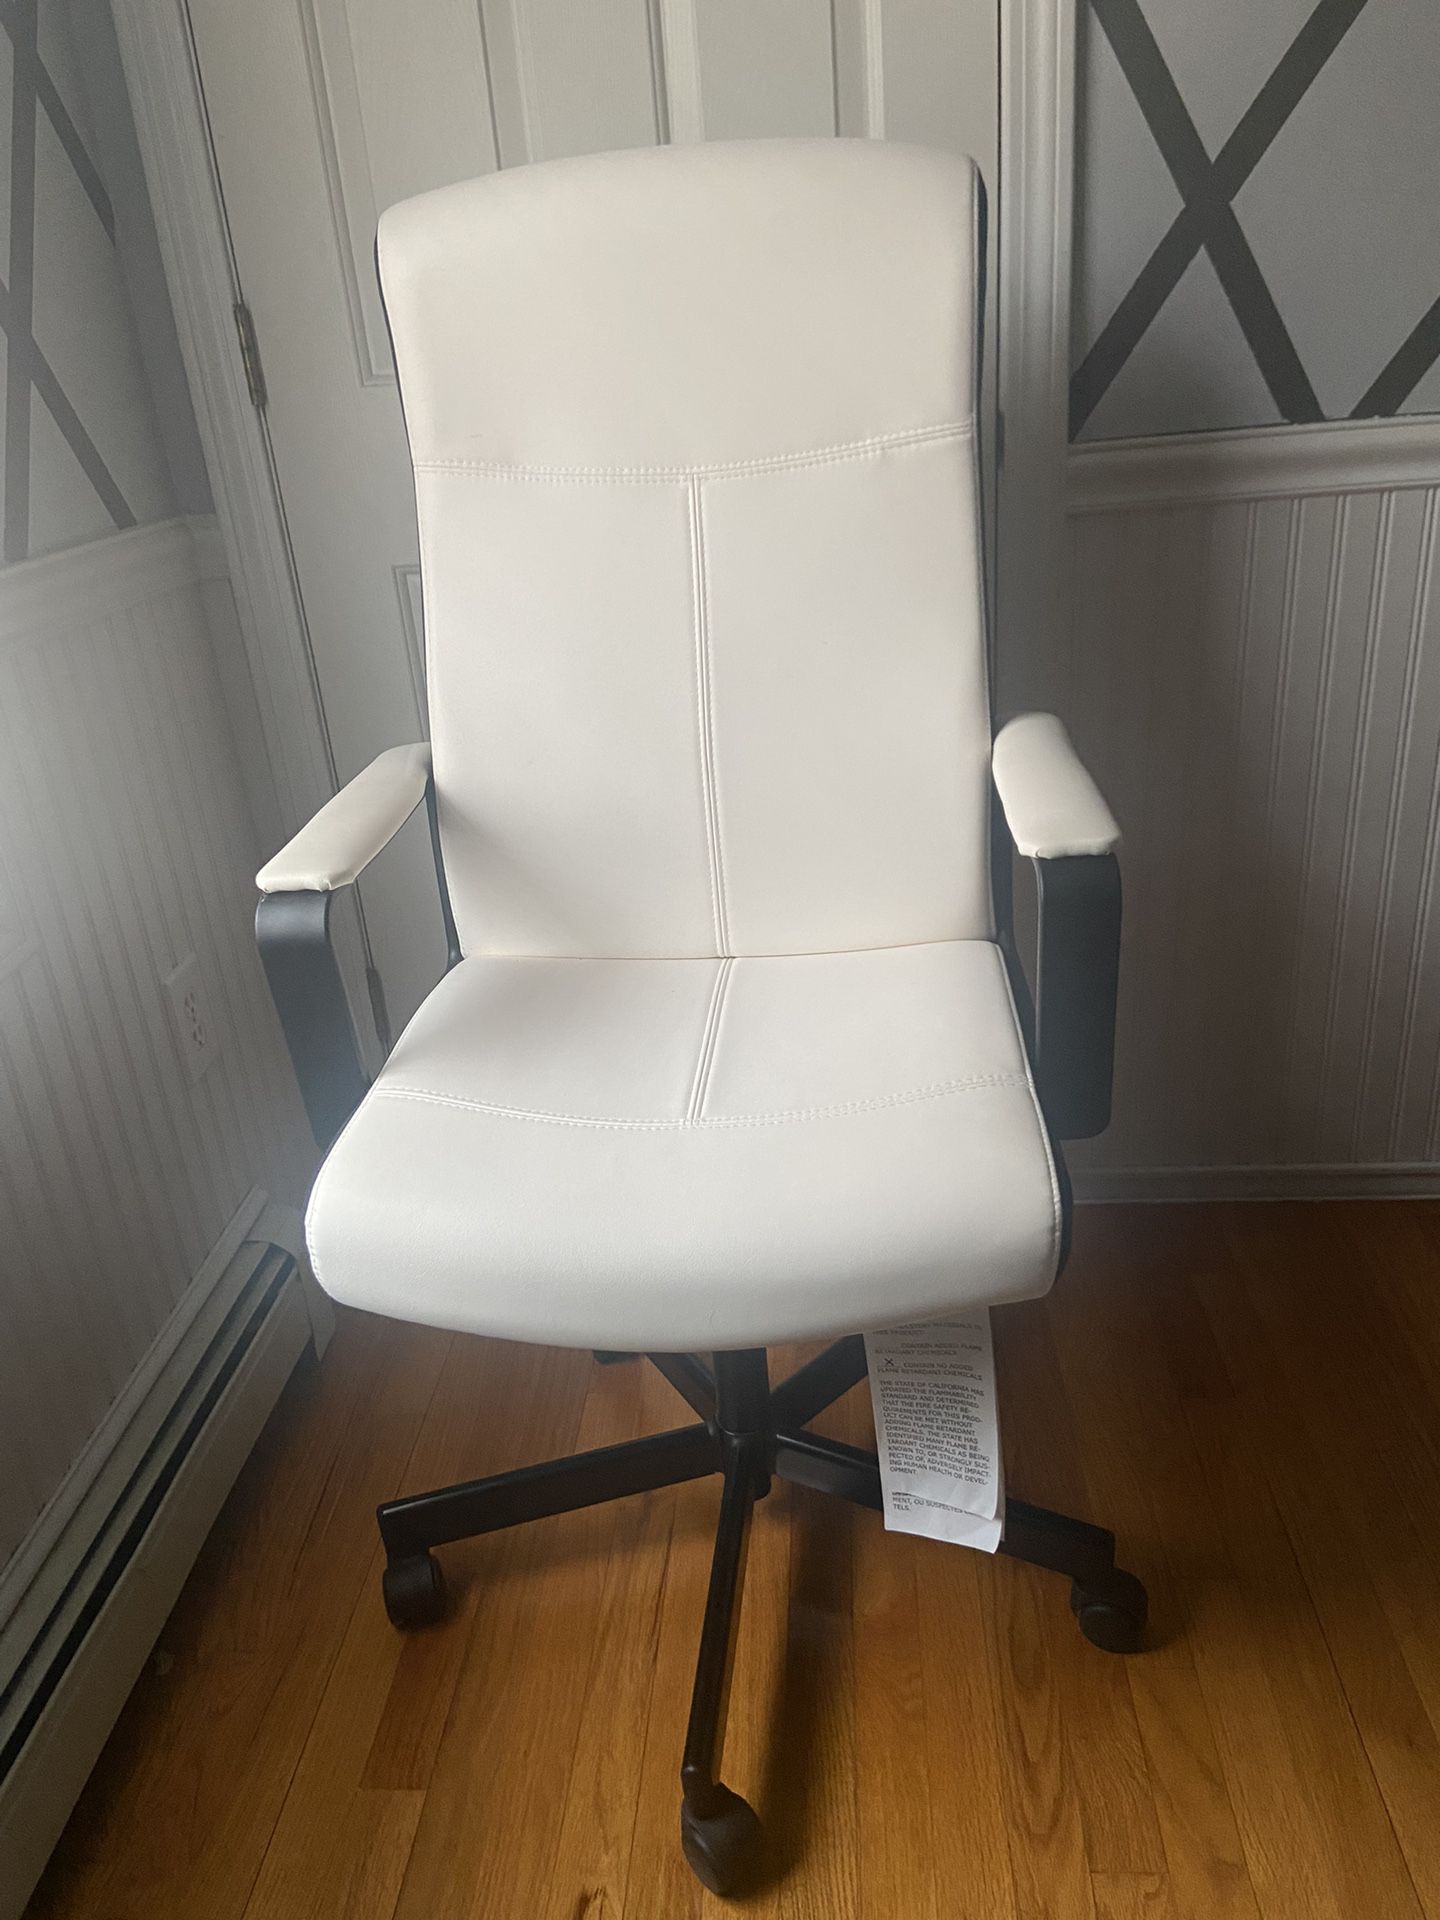 Office Chair From Ikea